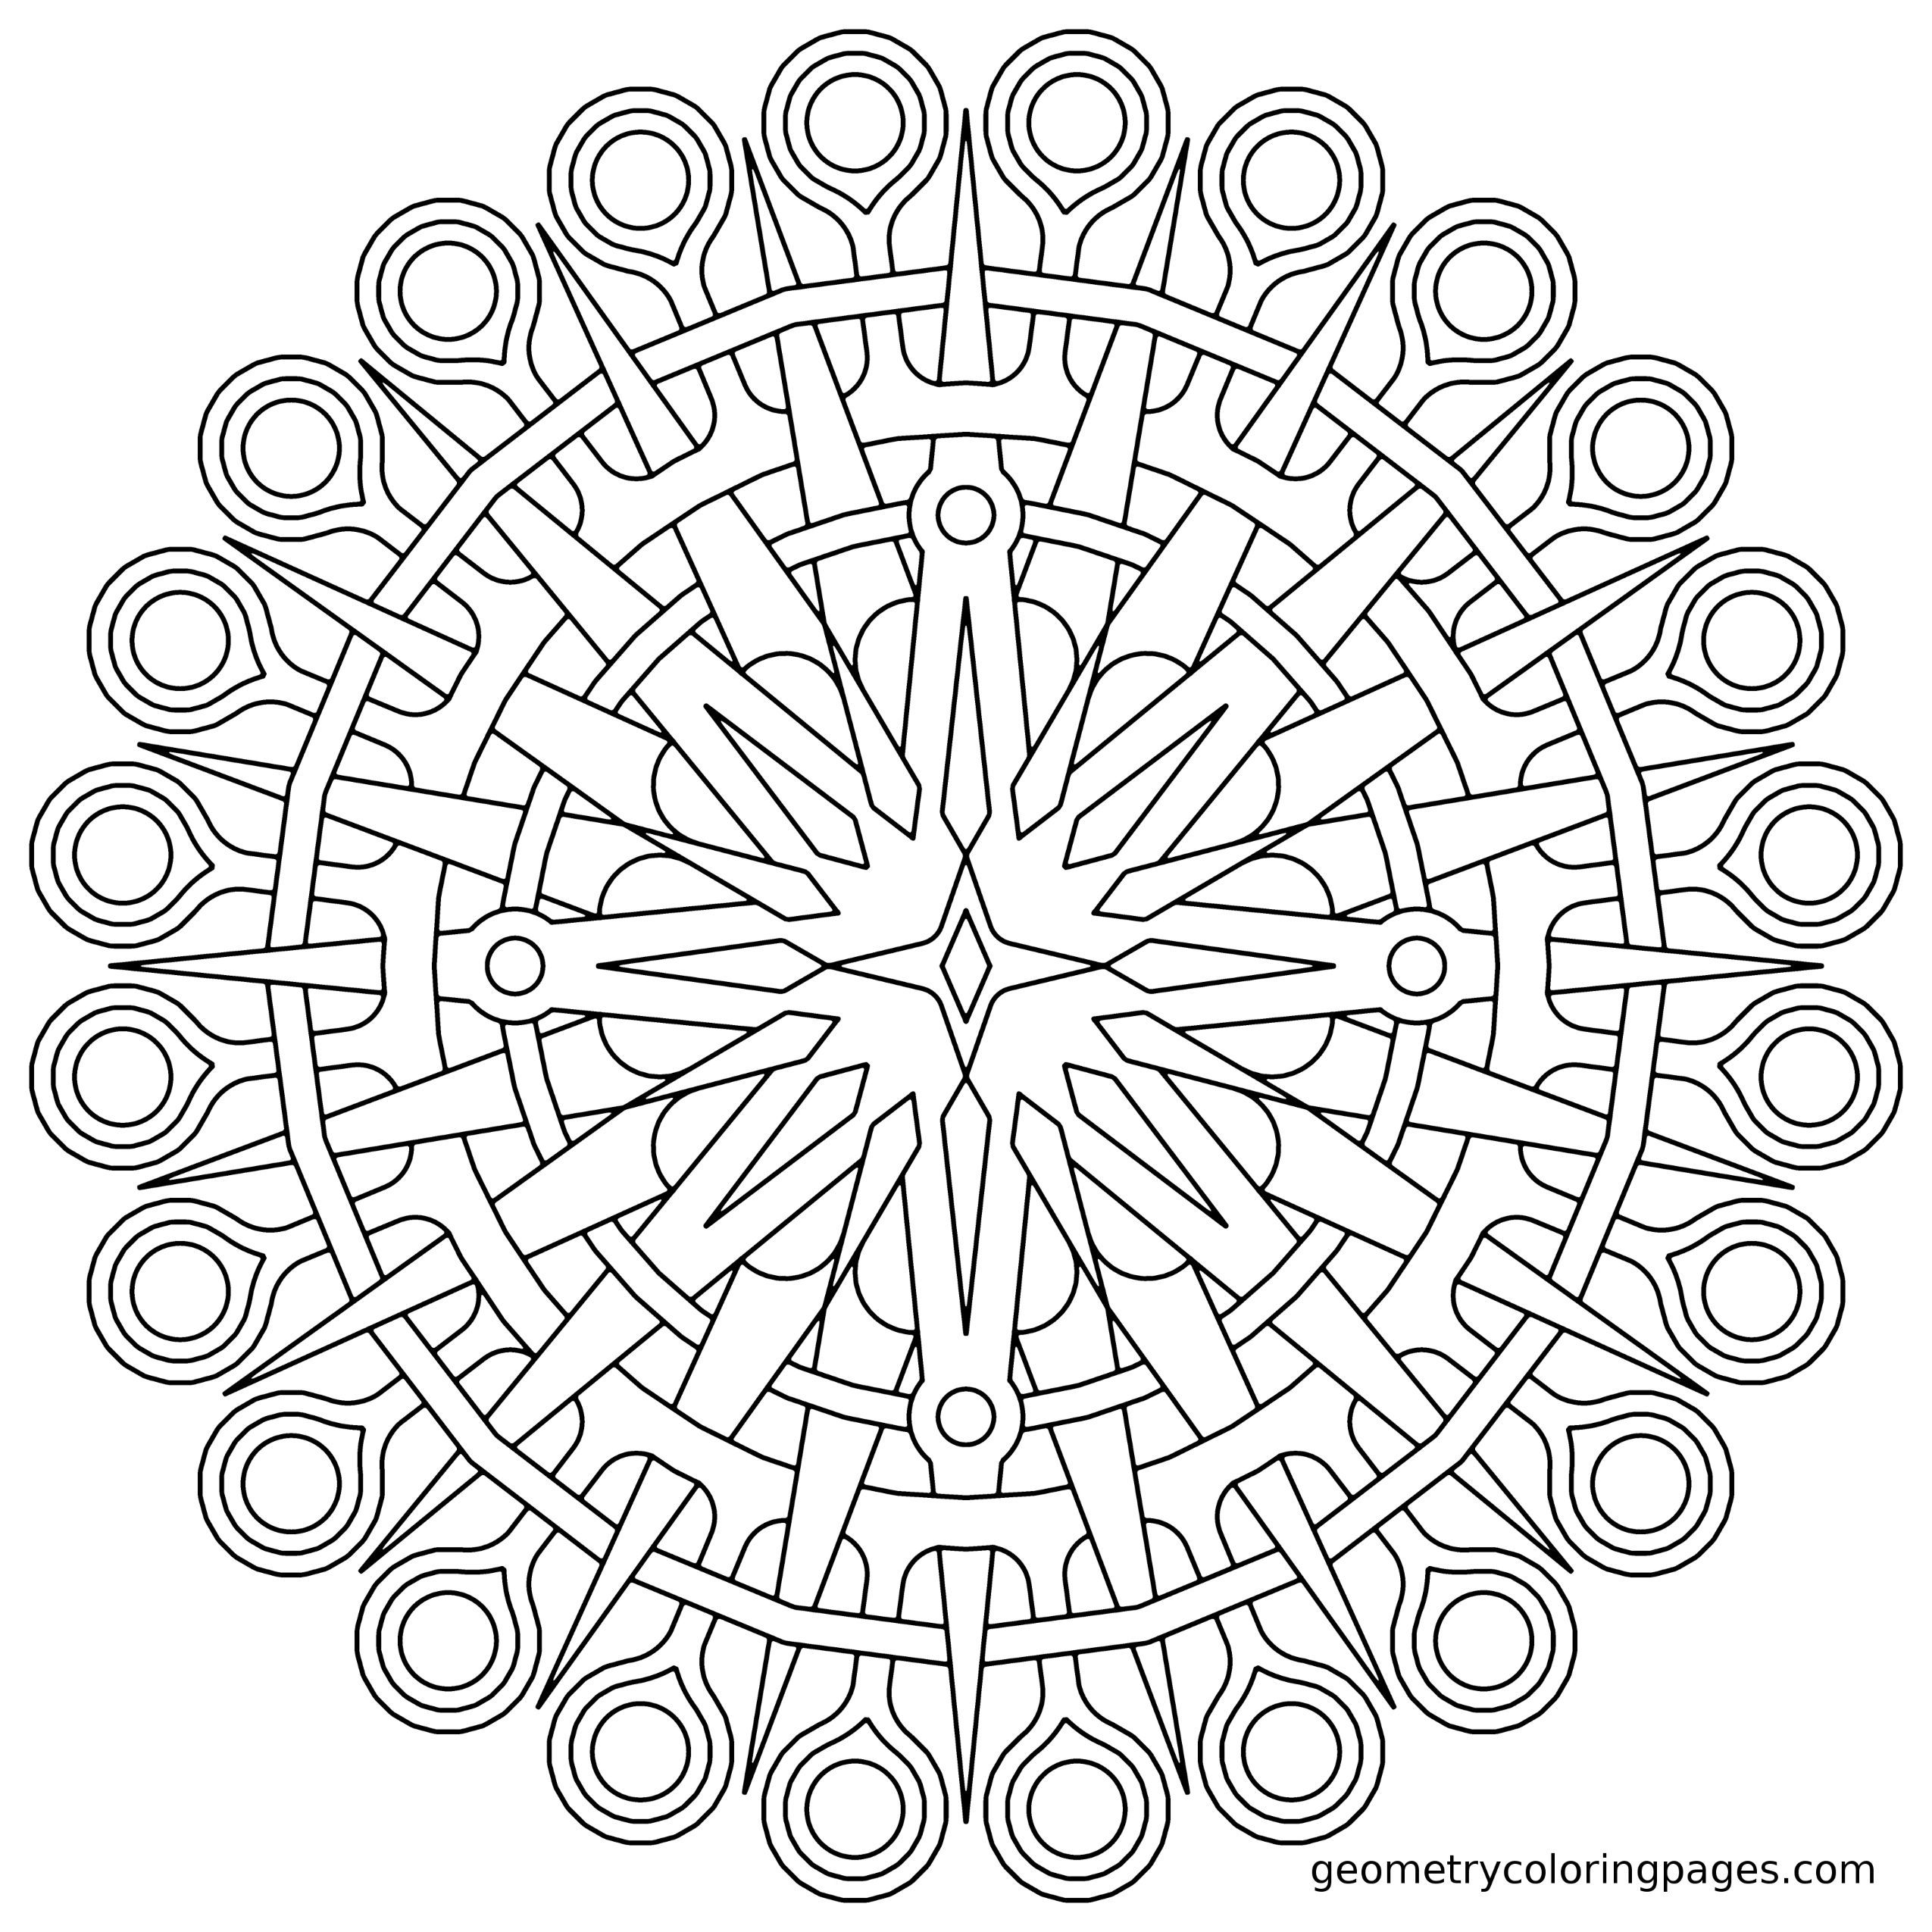 Geometry Coloring Pages all-age coloring pages - Album on Imgur